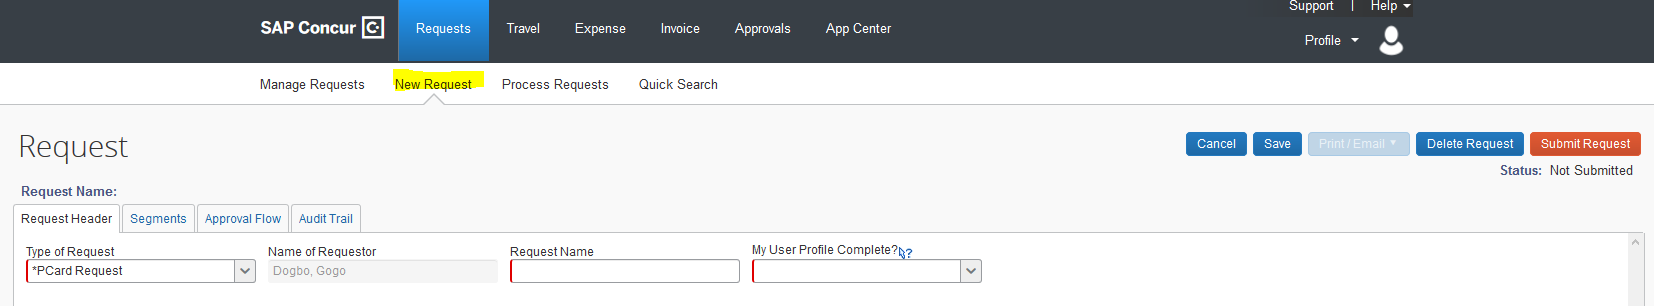 New Request option selected in iBuy+ Concur Portal